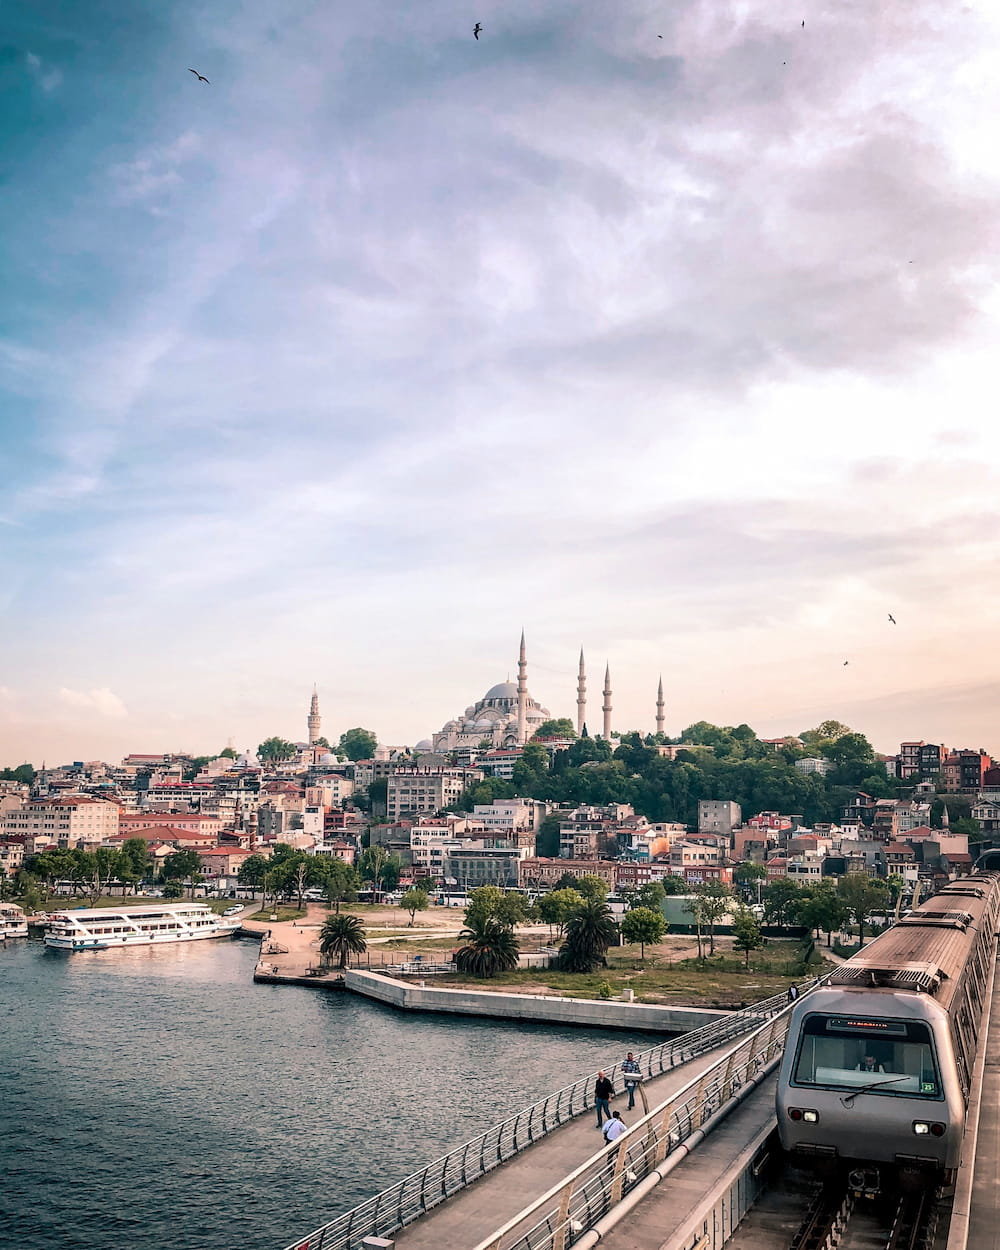 Image of Istanbul with tram crossing a bridge over the river